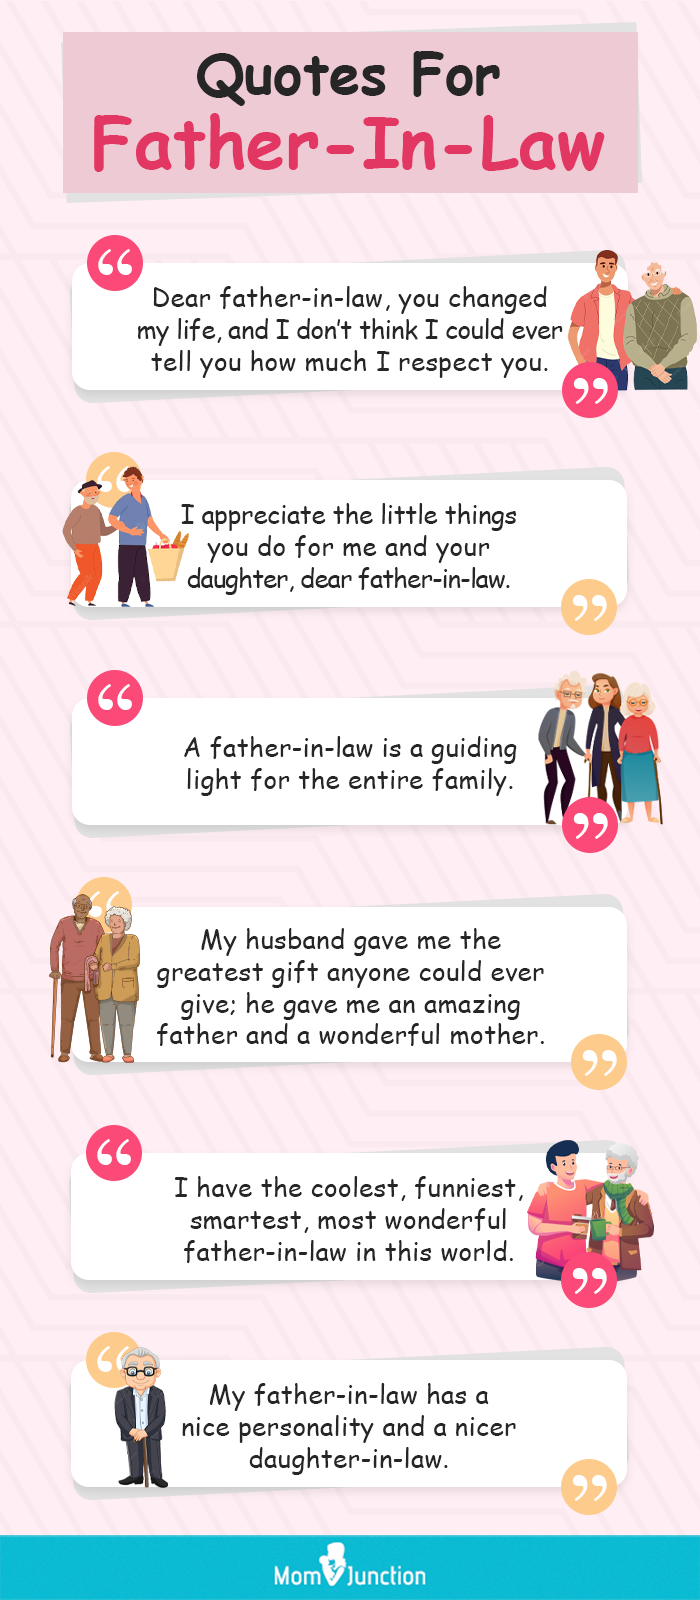 75 Best And Funny Father-In-Law Quotes